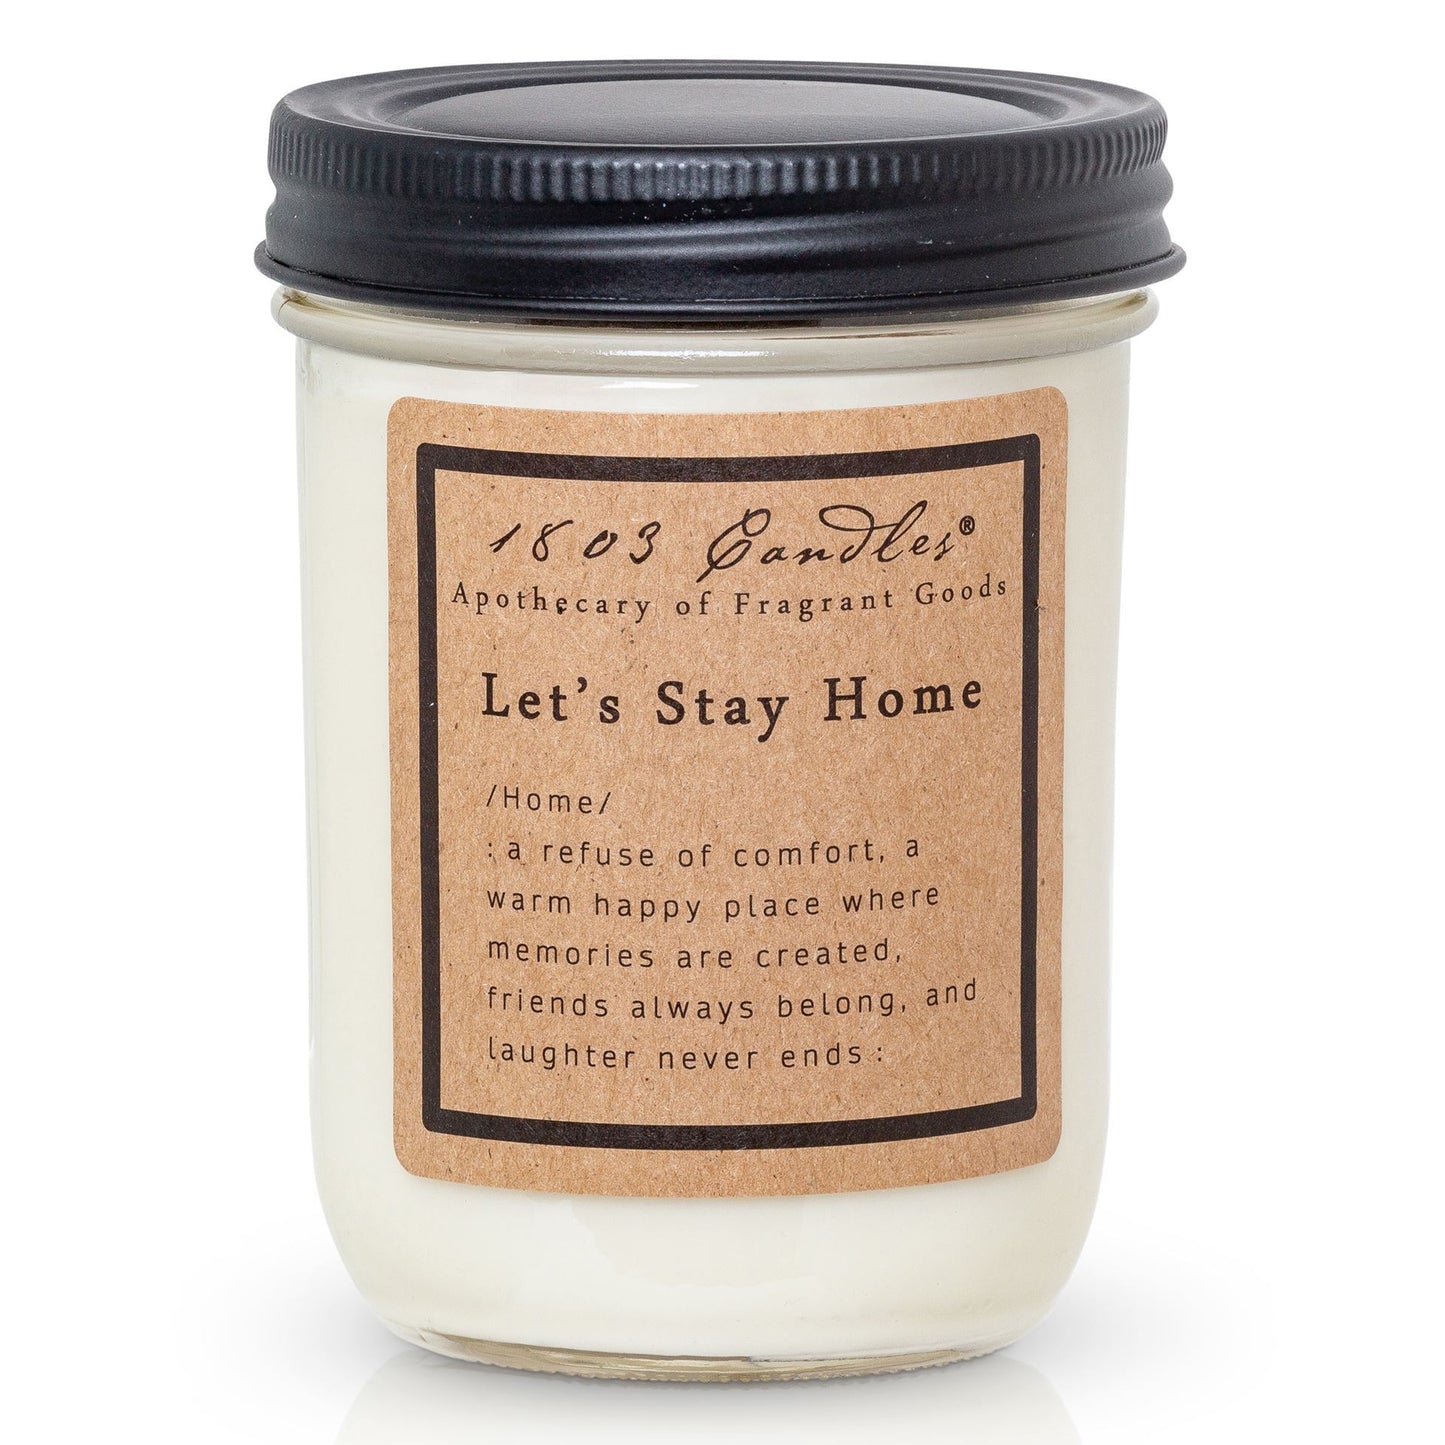 1803 let's stay home candle 14 oz.